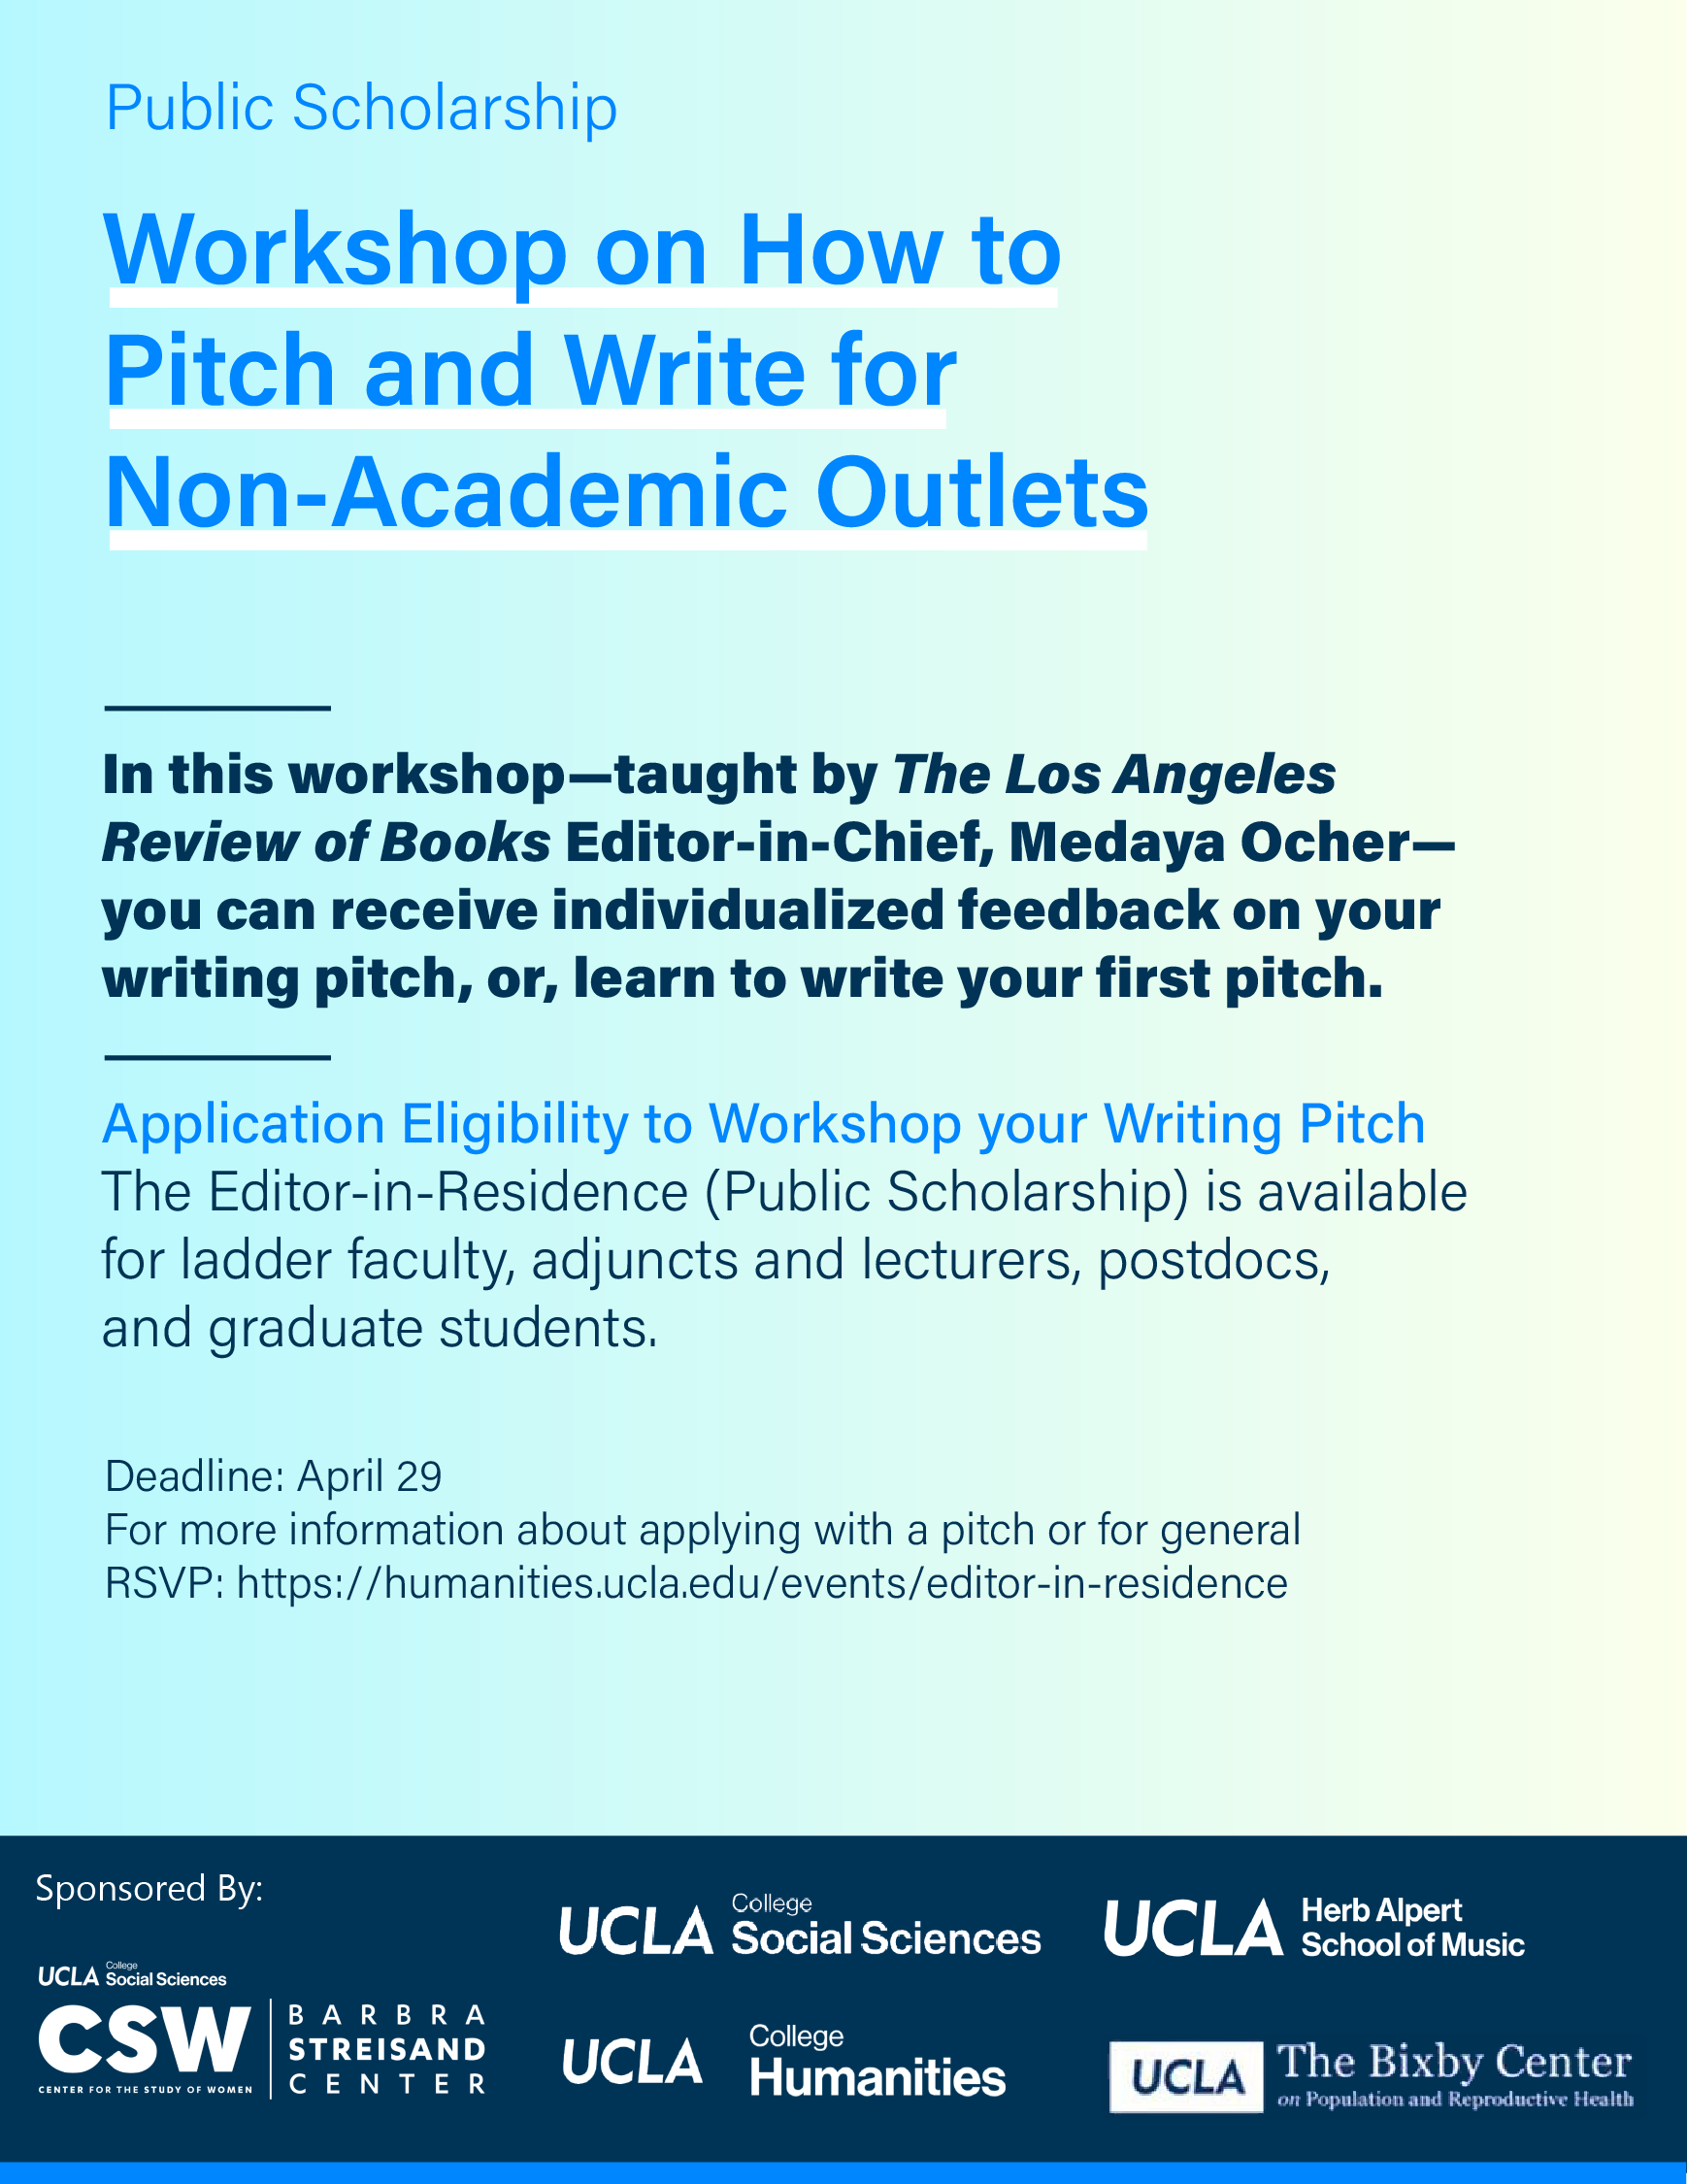 Workshop on How to Pitch and Write for Non-Academic Outlets